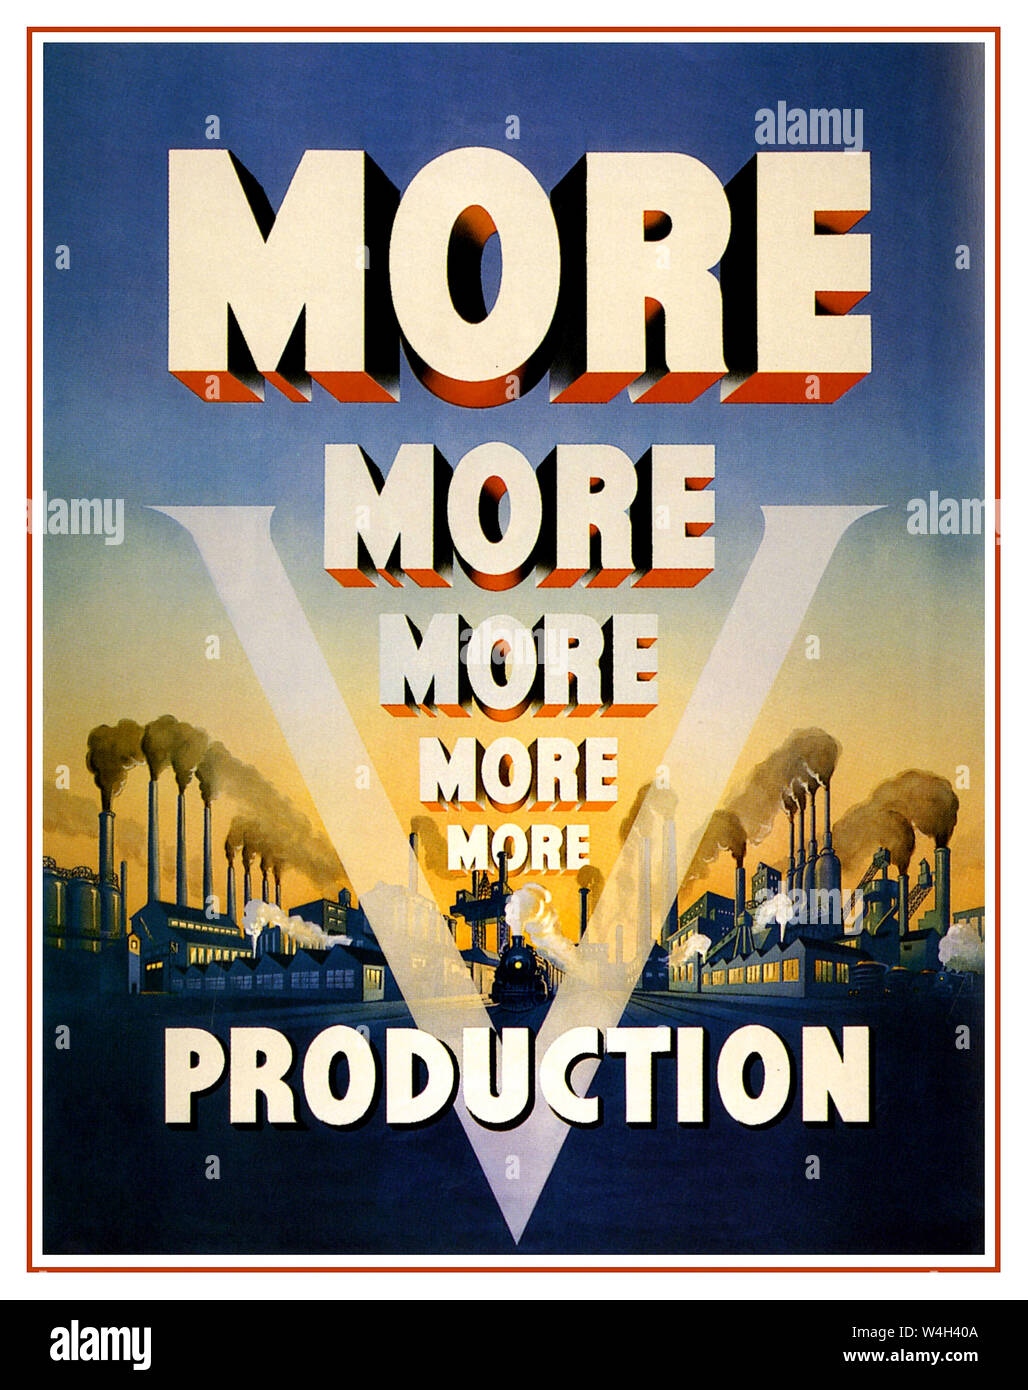 Vintage WW2 USA Propaganda Poster ”More more more....Production' - Cable Corporation poster, 1942. War industrial output motivational poster AMERICA USA Stock Photo